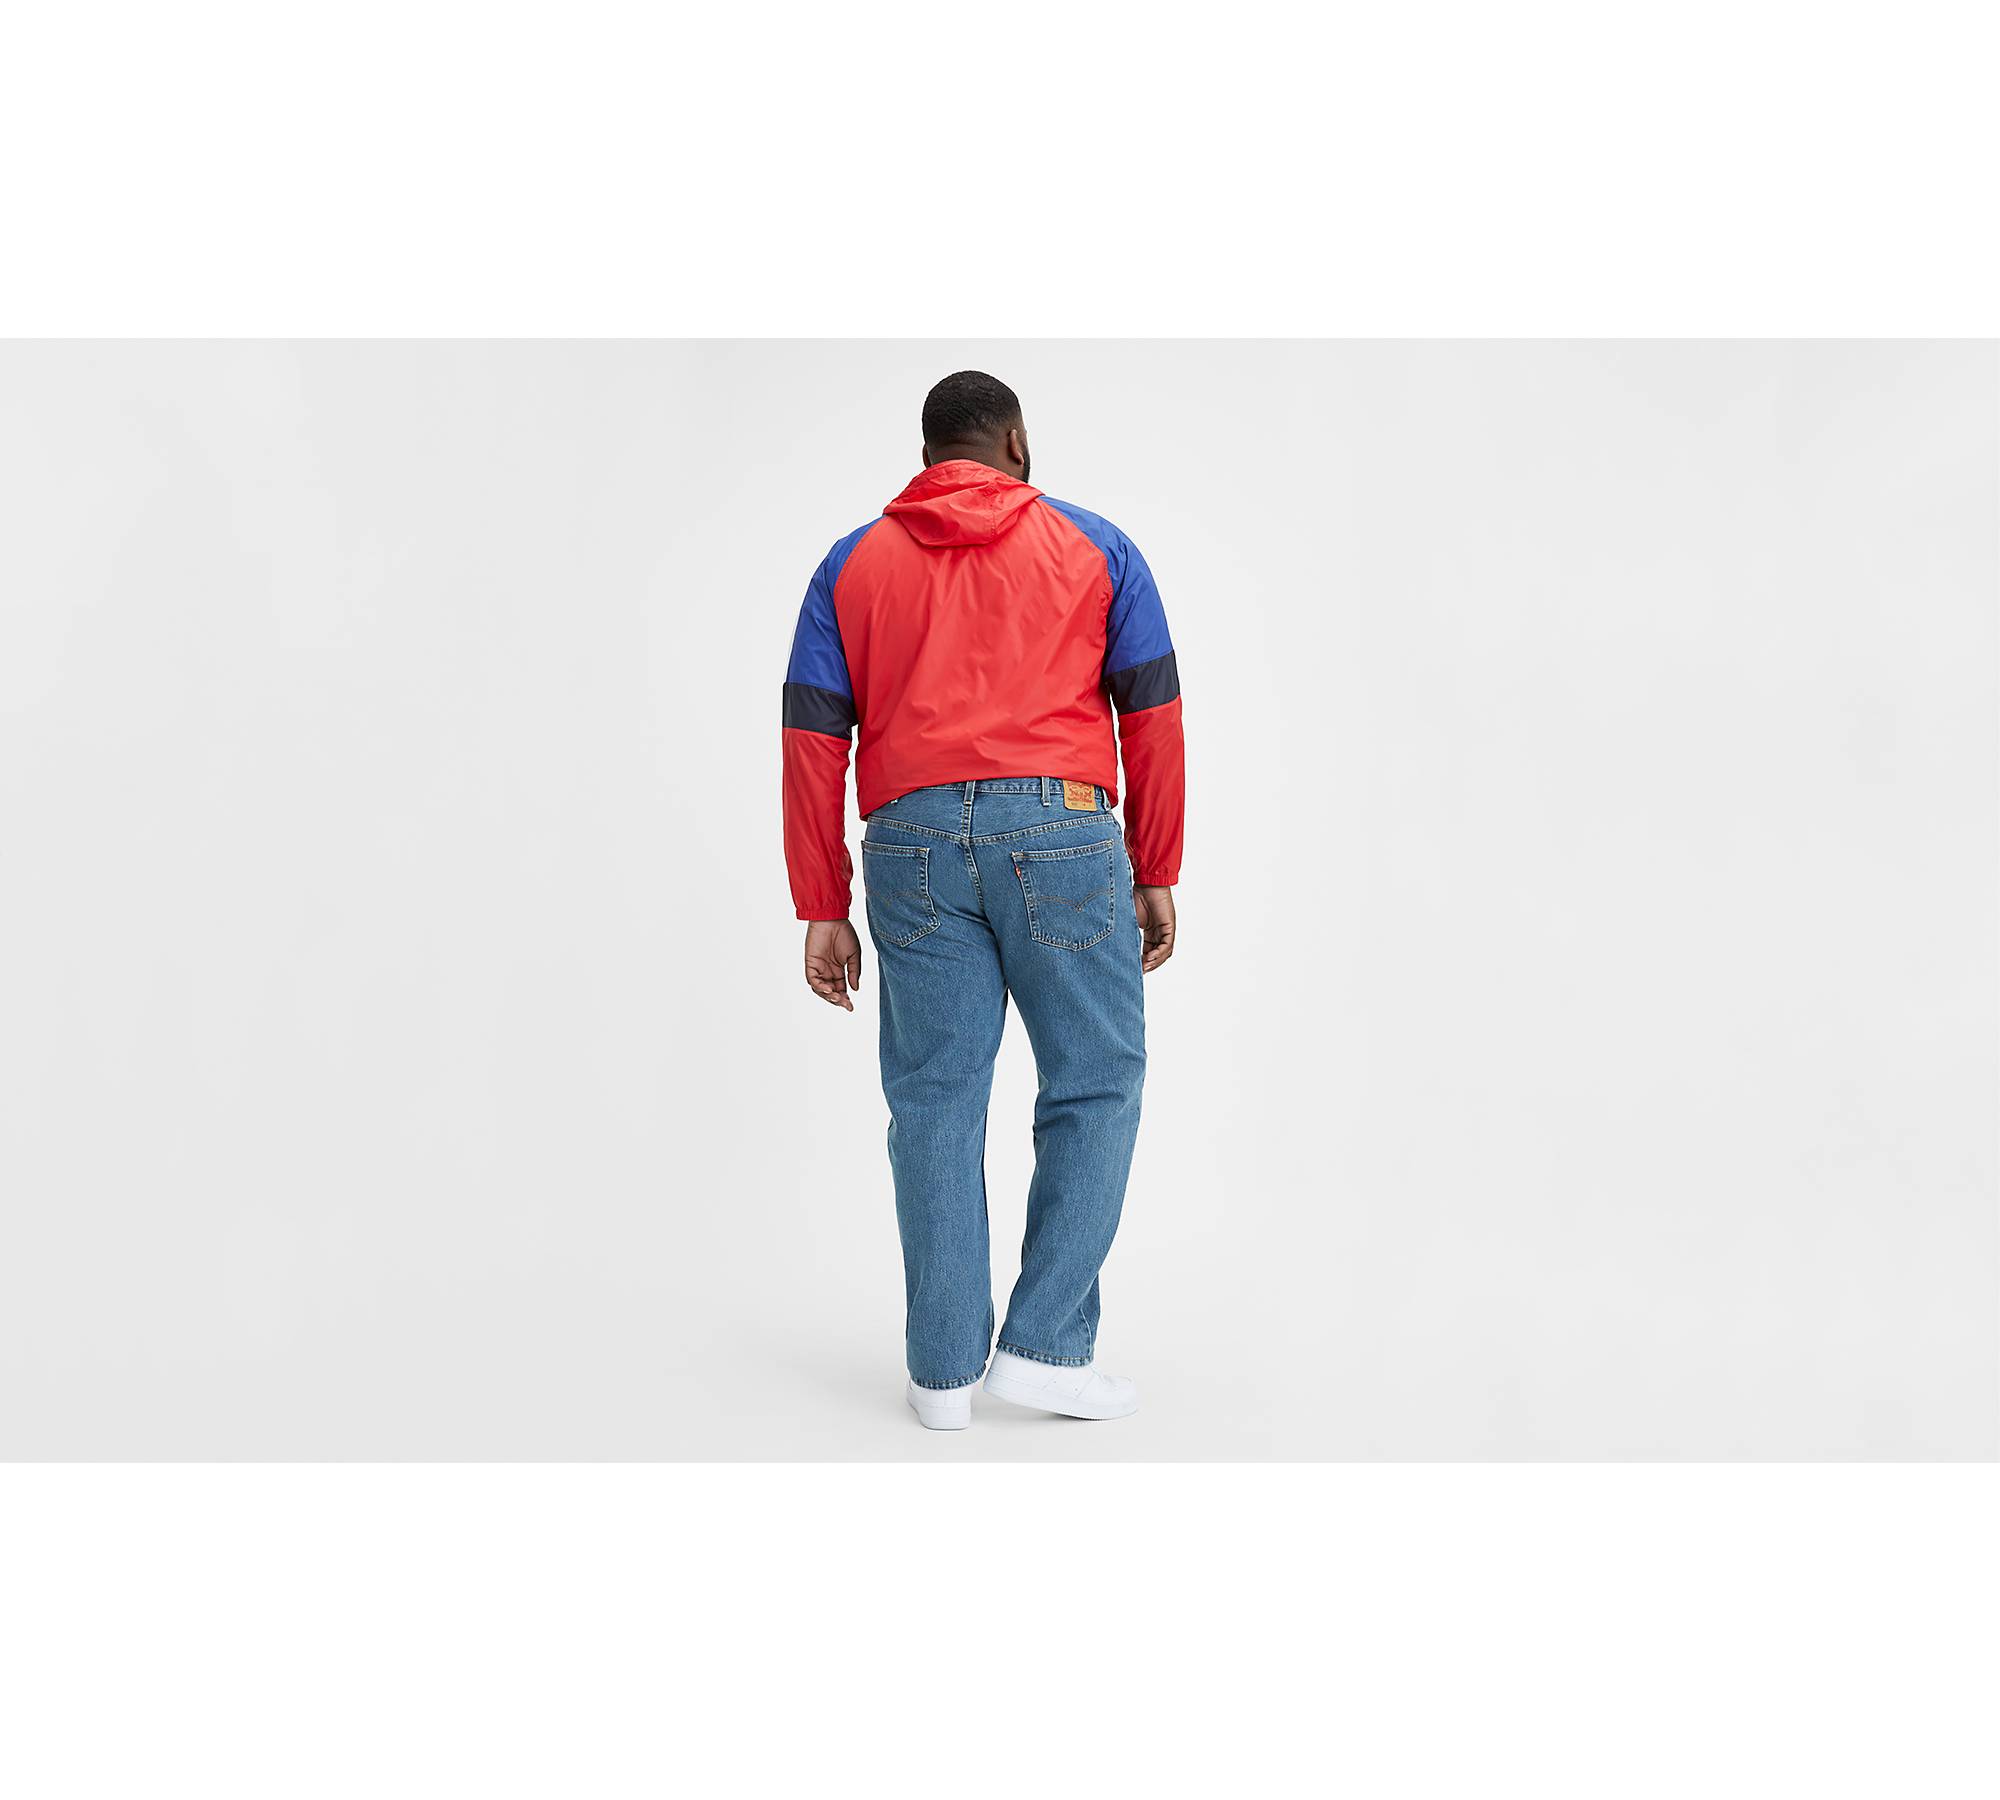 Levi's Men's 505 Regular Fit Jeans (Also Available in Big & Tall